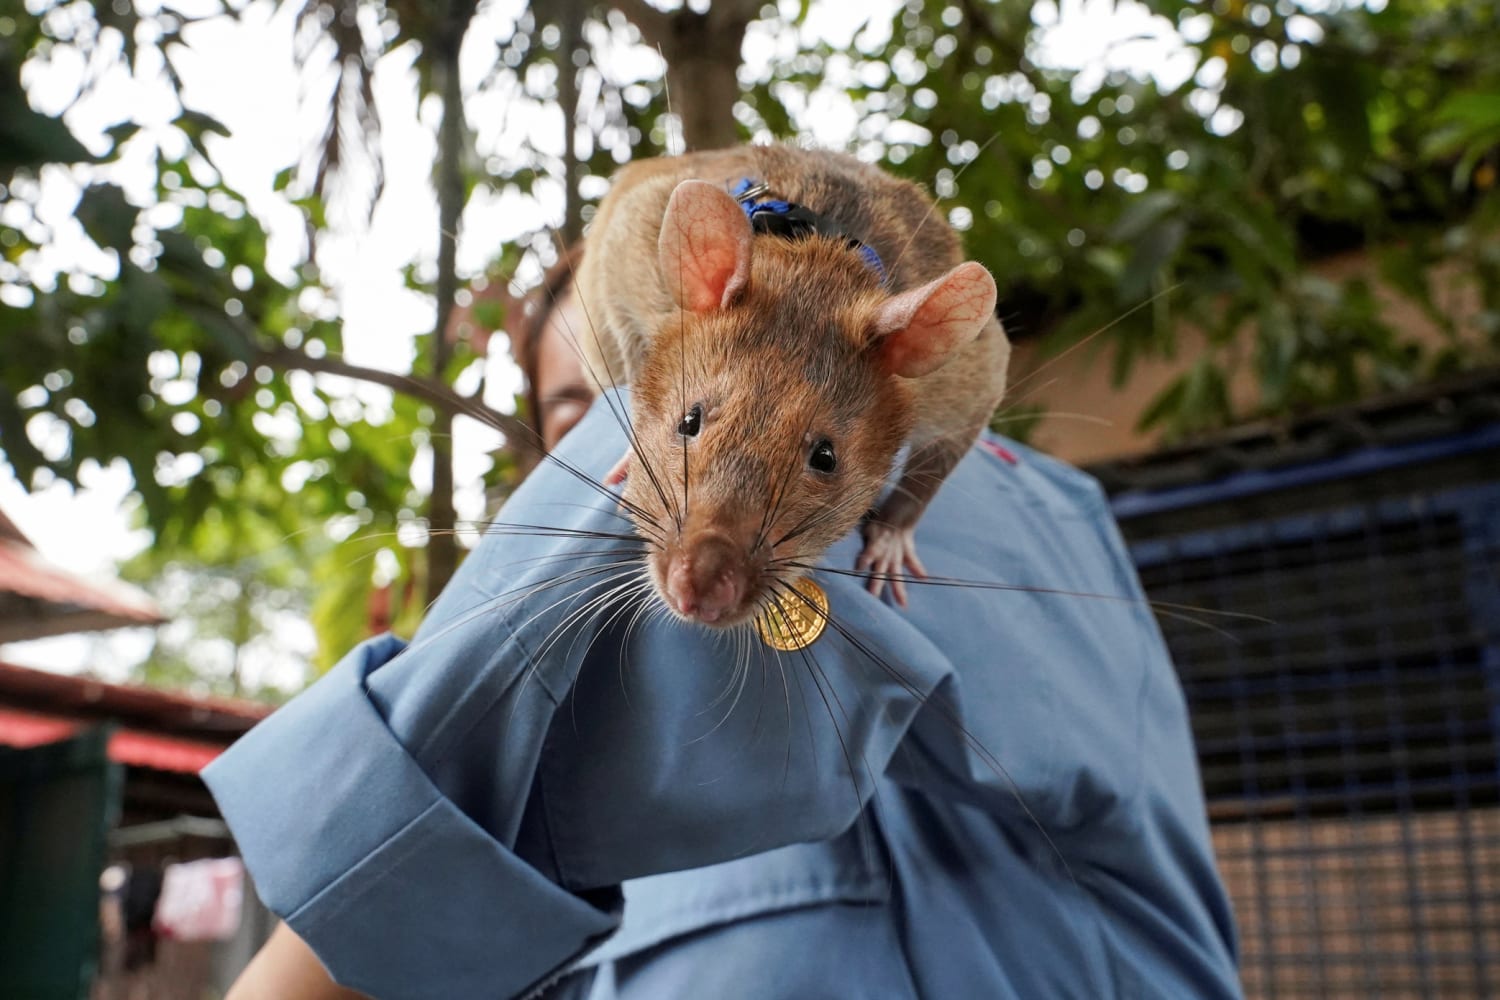 'Hero rat' renowned for record-breaking Cambodia land mine detection dies